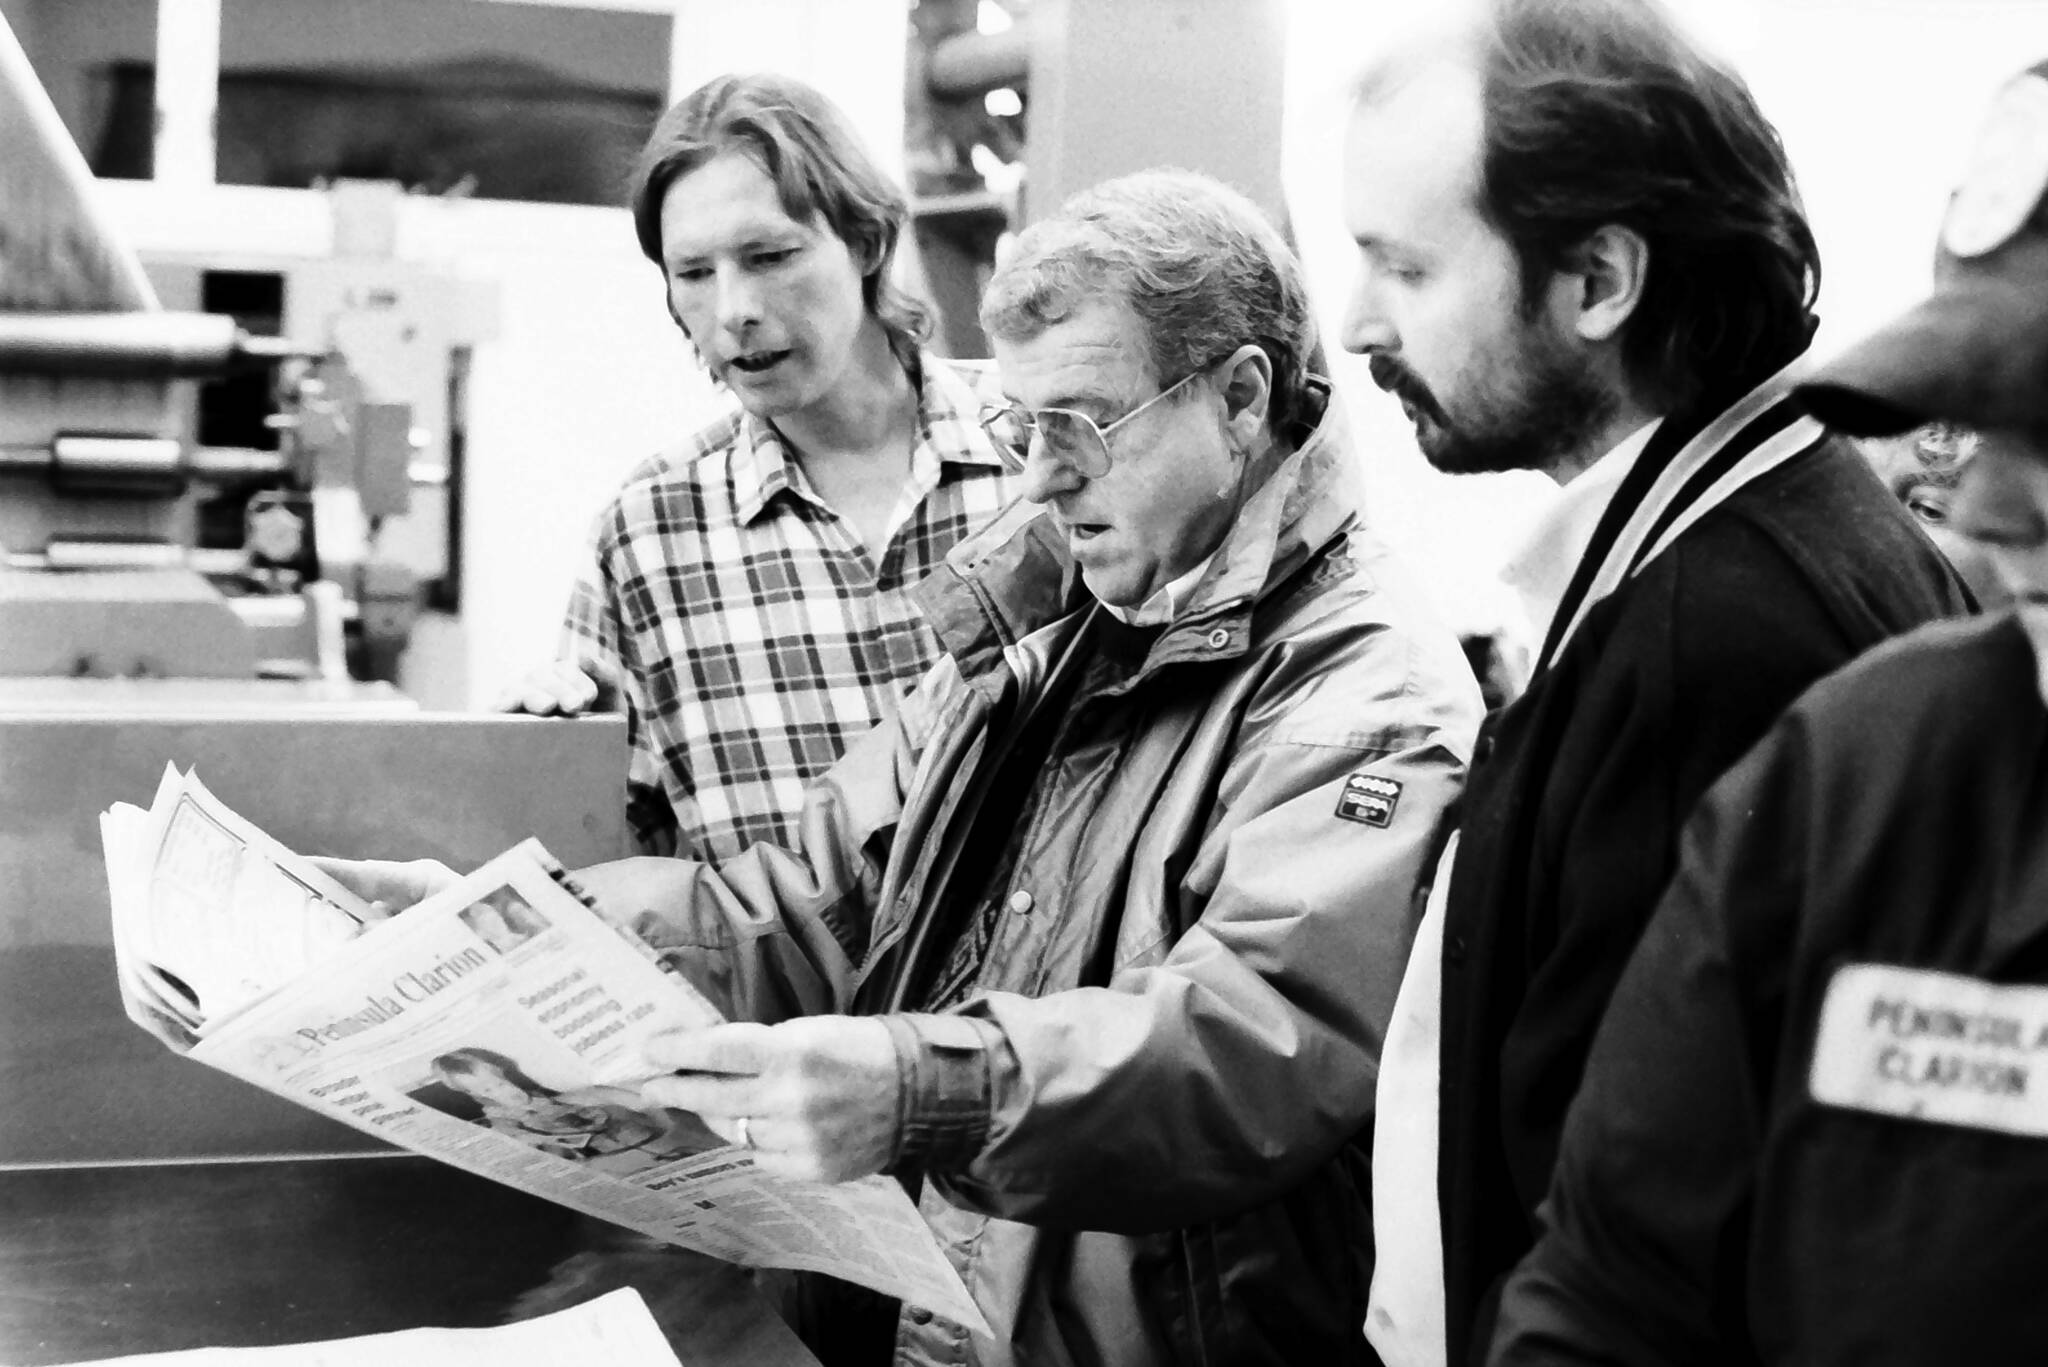 Dick Westmoreland, Ronnie Hughes and Jon Little look over one of the first newspapers to come off the Clarion’s Goss Suburban in December 1992 in the Peninsula Clarion pressroom in Kenai. (Roy Shapeley/Peninsula Clarion)